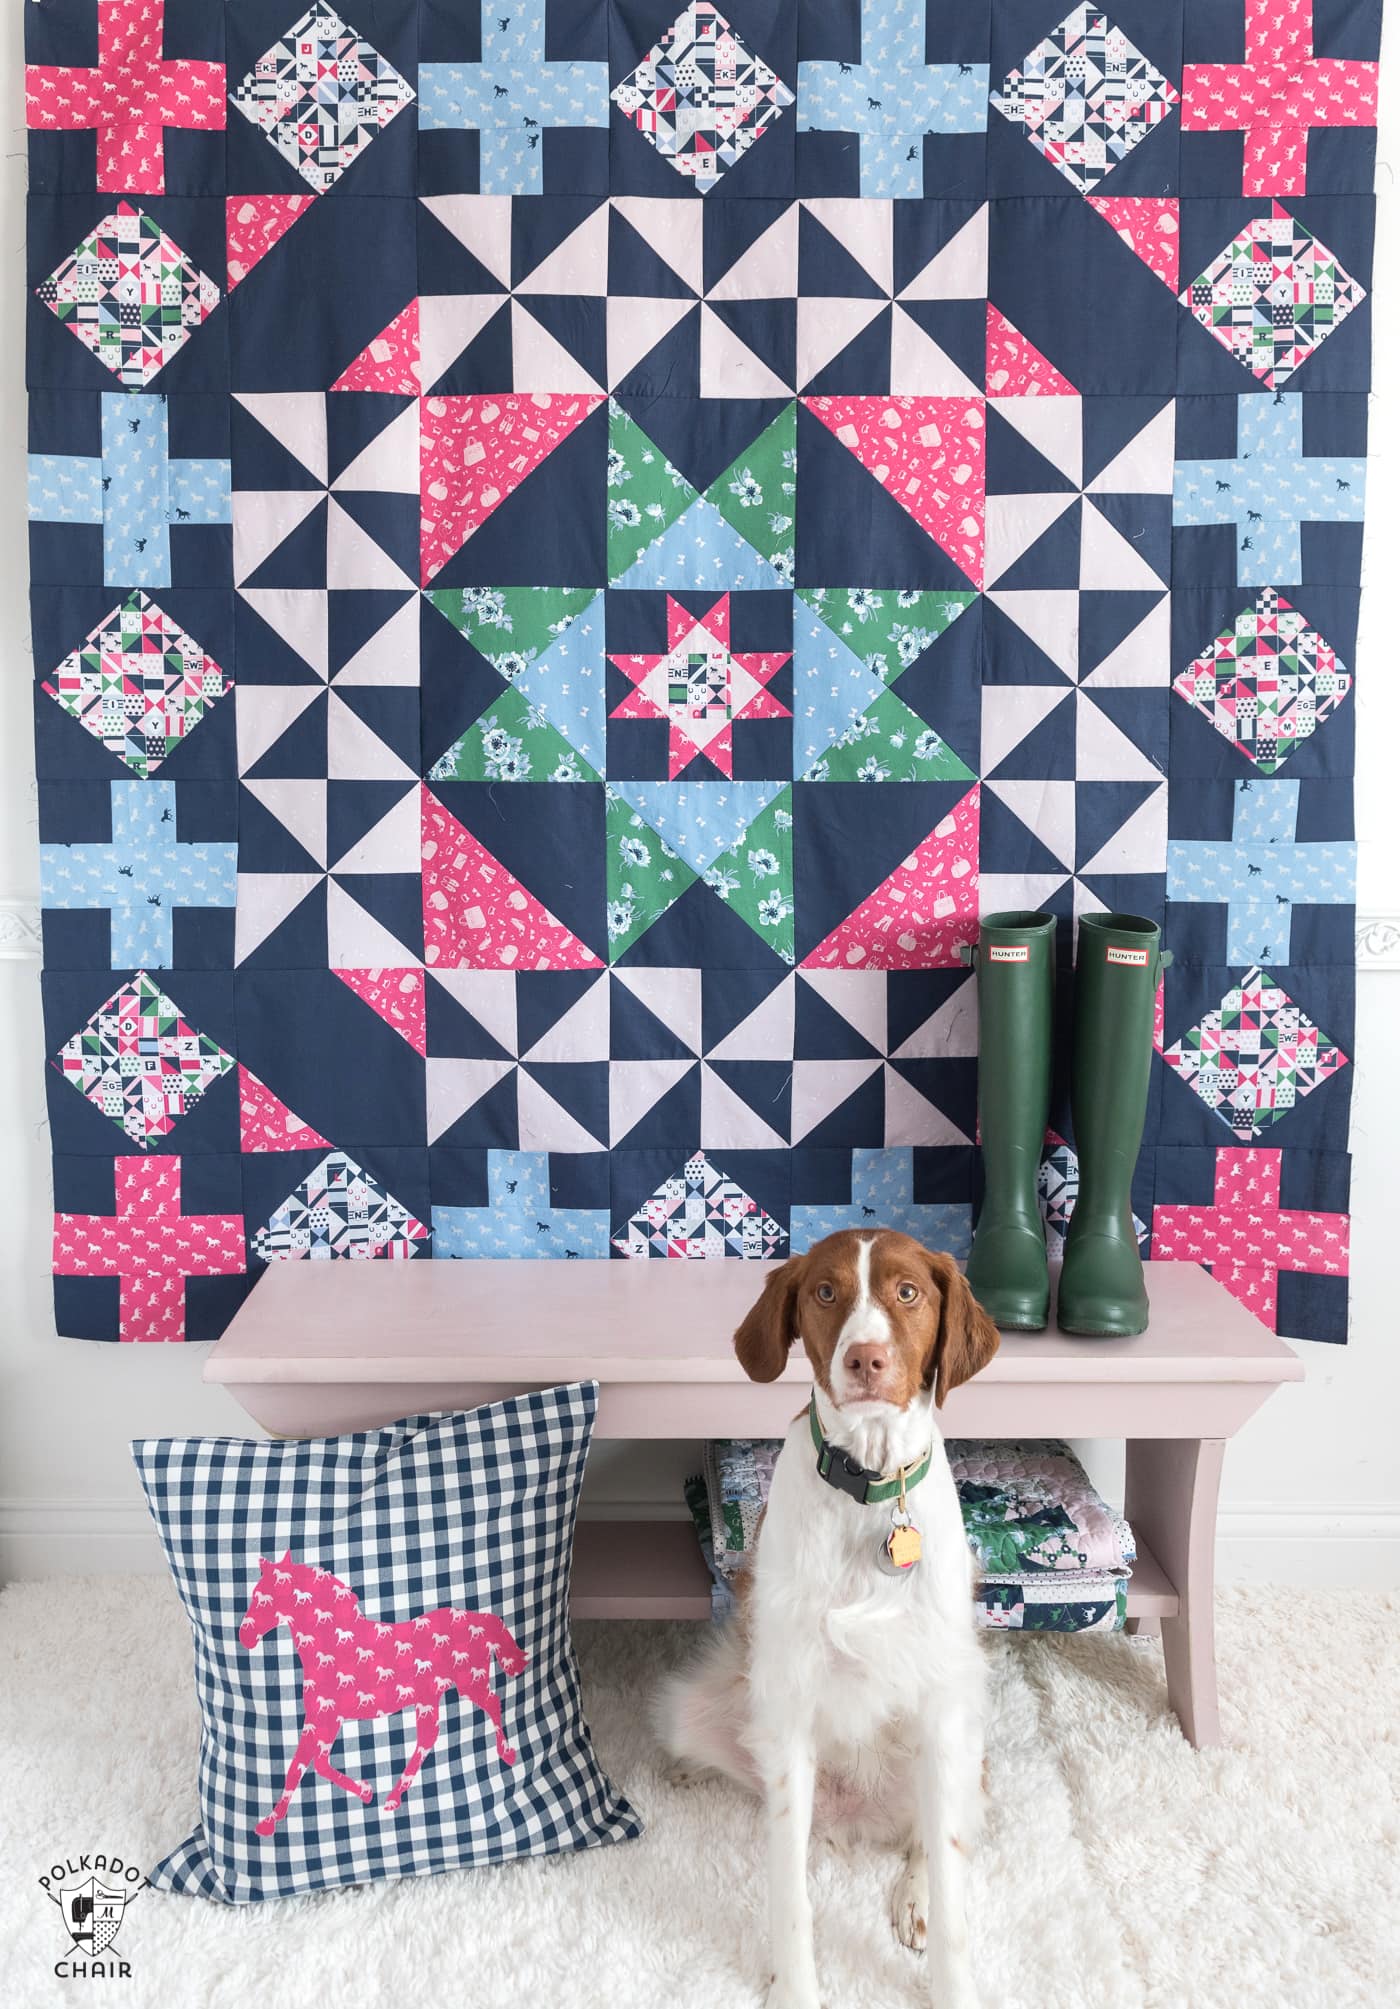 Patchwork Paddock quilt pattern, a fun graphic medallion style quilt pattern by melissa mortenson of polkadotchair.com featuring Derby Day fabrics